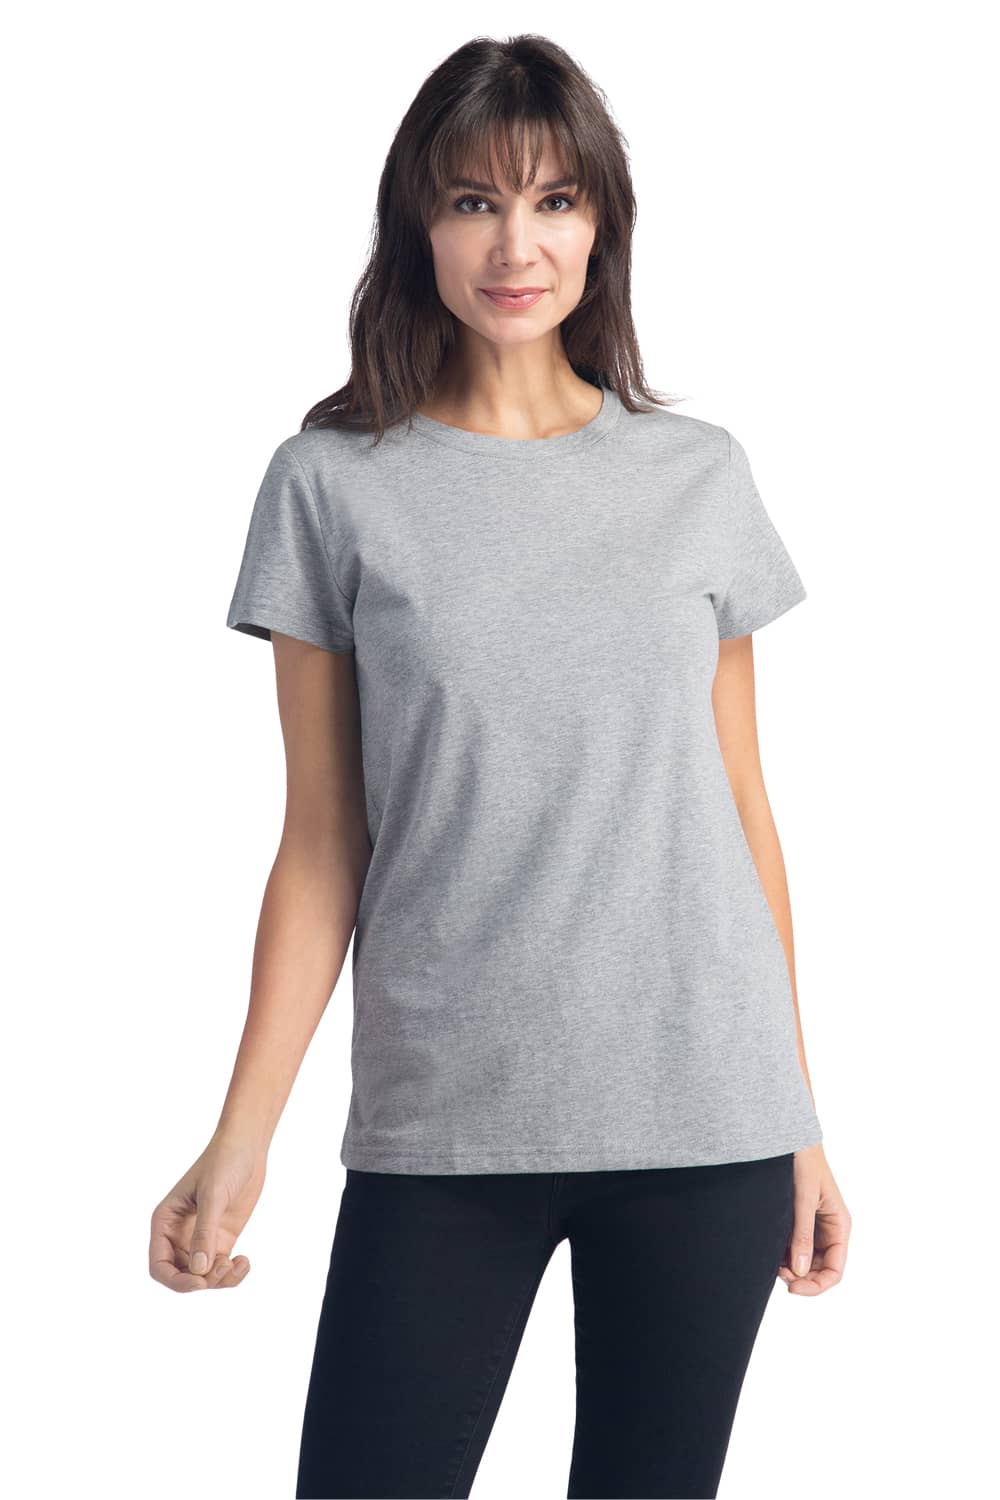 Women's Classic Fit EcoFabric™ Crew Neck Tee Womens>Casual>Top Fishers Finery Light Heather Gray X-Small 